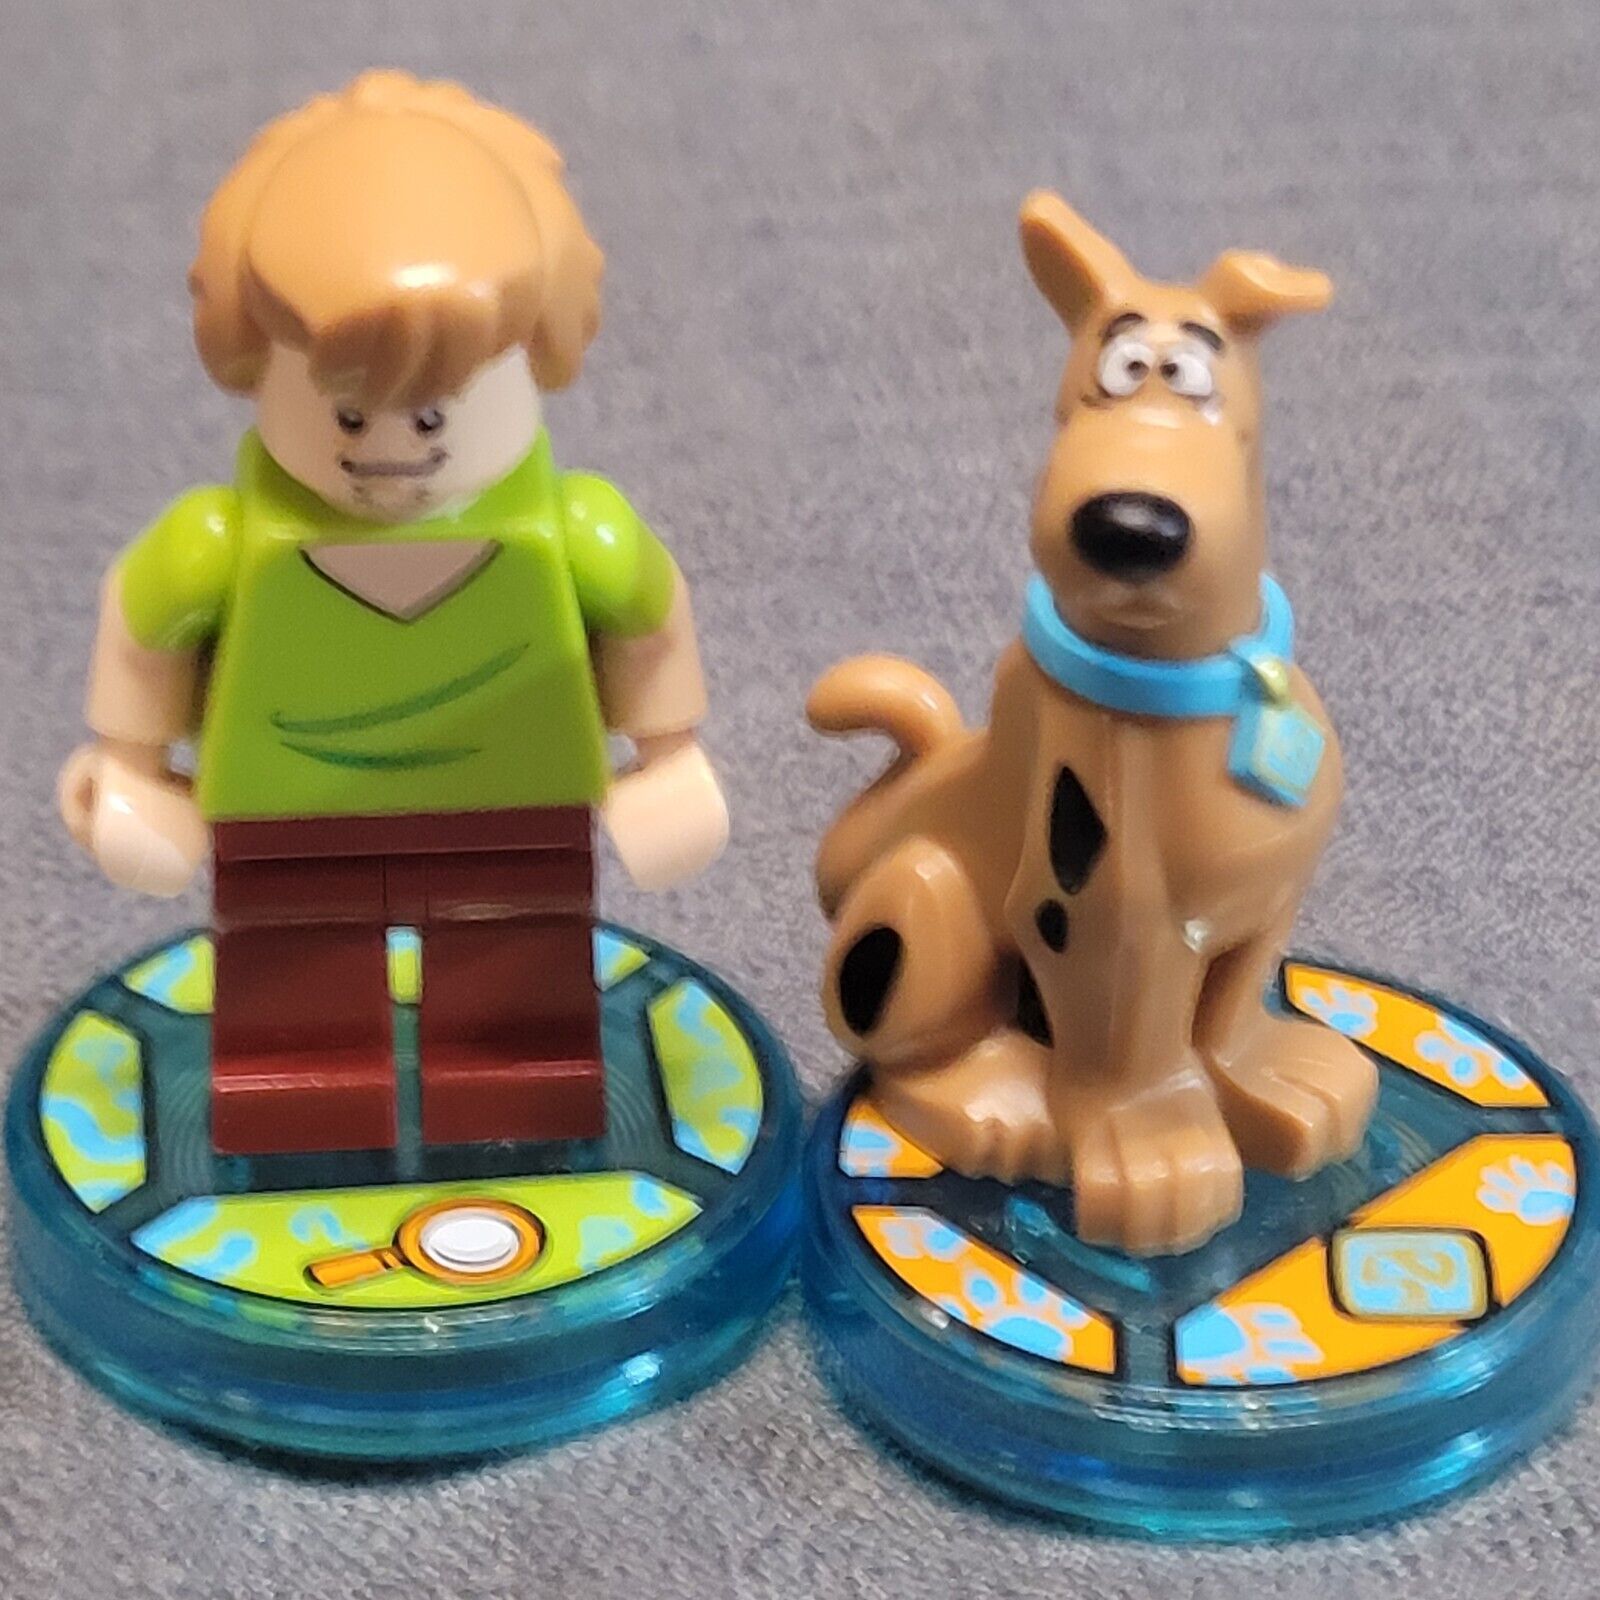 Primary image for Lego Dimensions Scooby-Doo & Shaggy Movie Figurine + Toy Tags